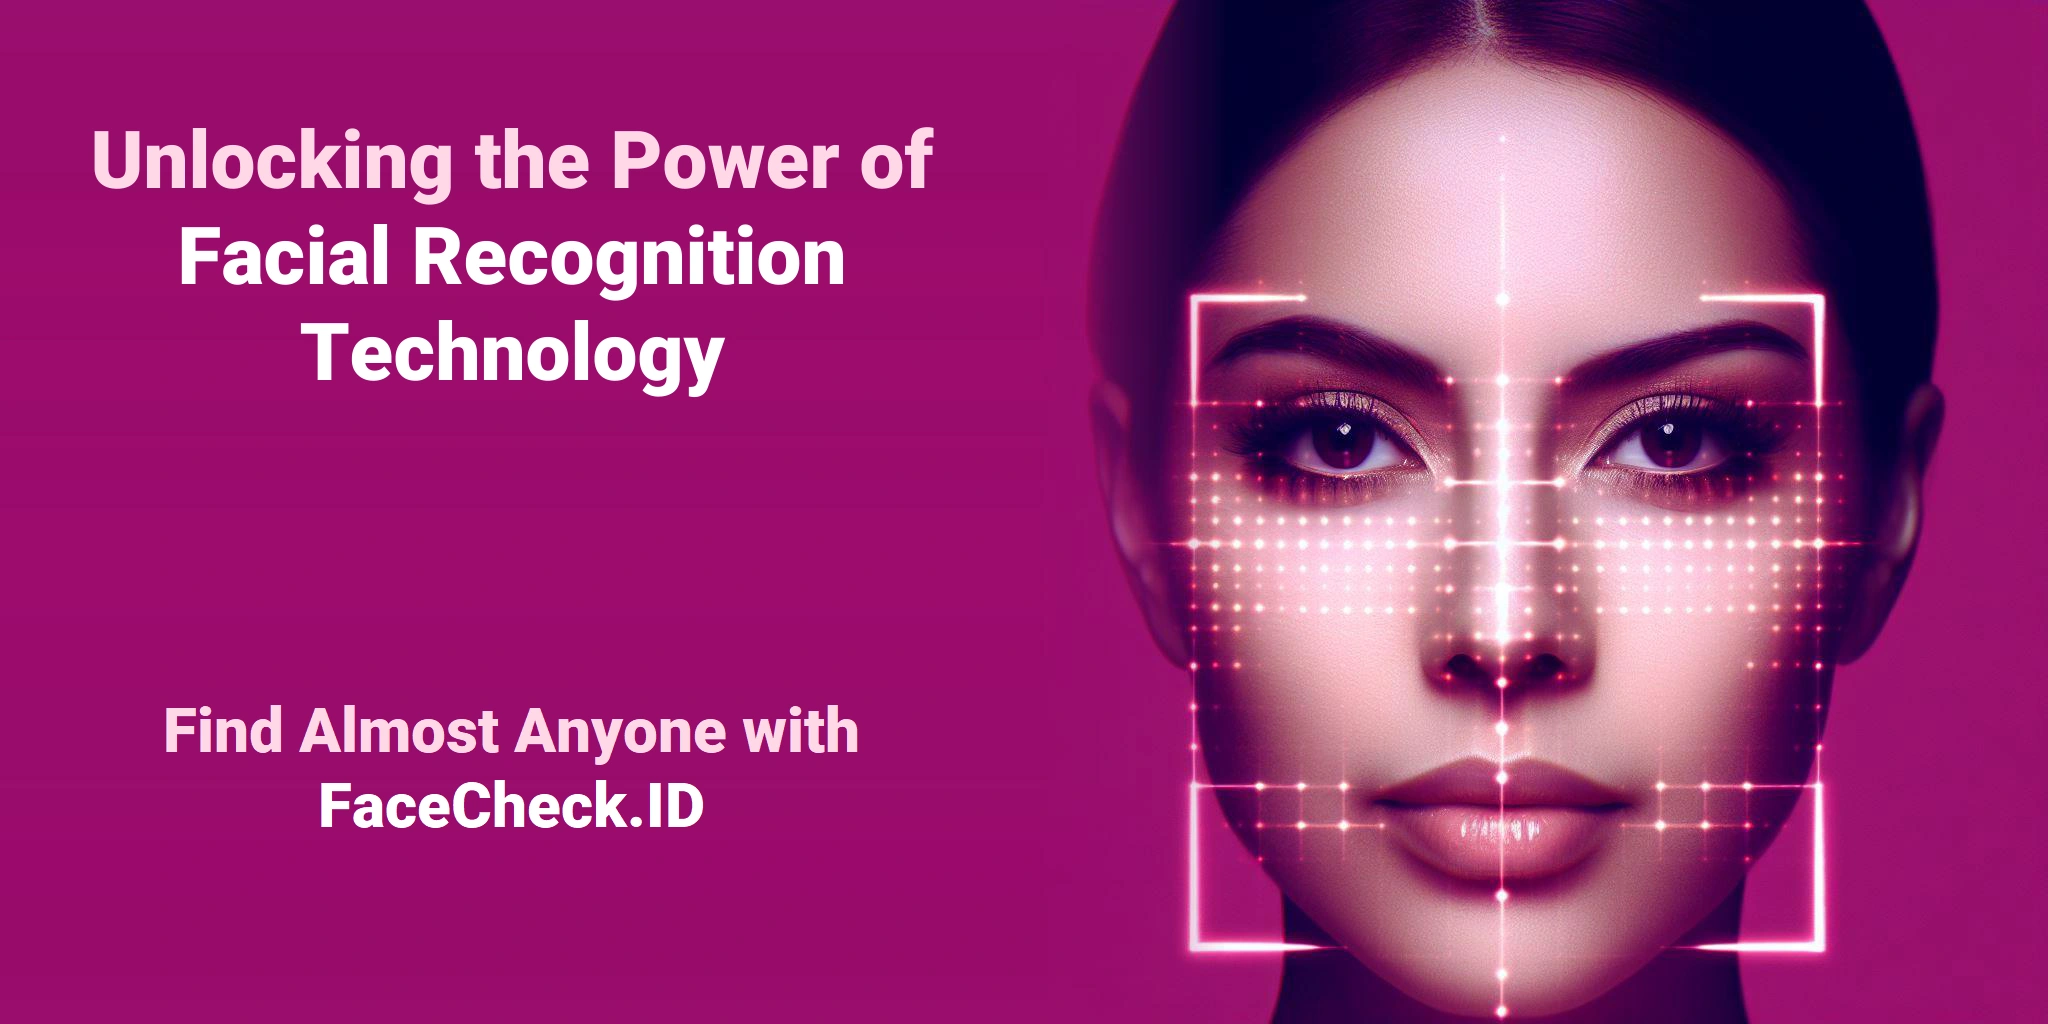 Unlocking the Power of Facial Recognition Technology Find Almost Anyone with FaceCheck.ID